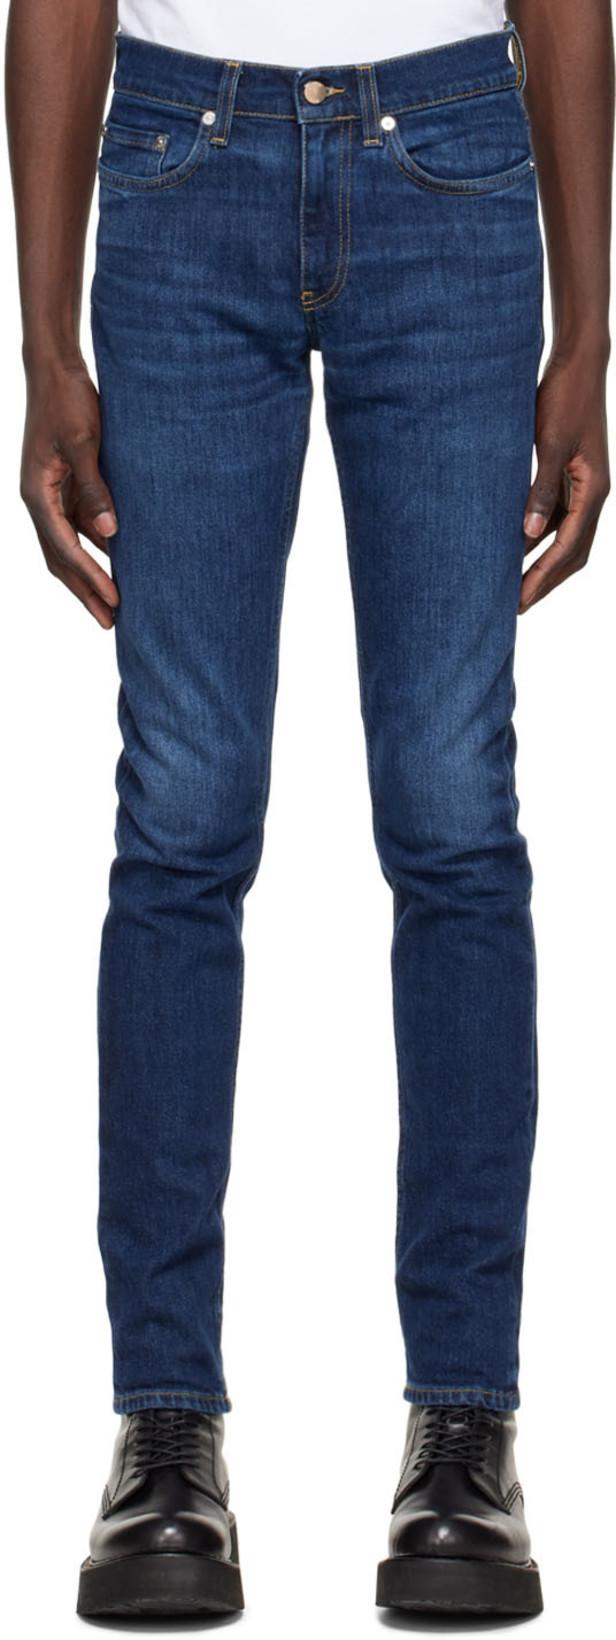 Navy 25 Jeans by BLK DNM